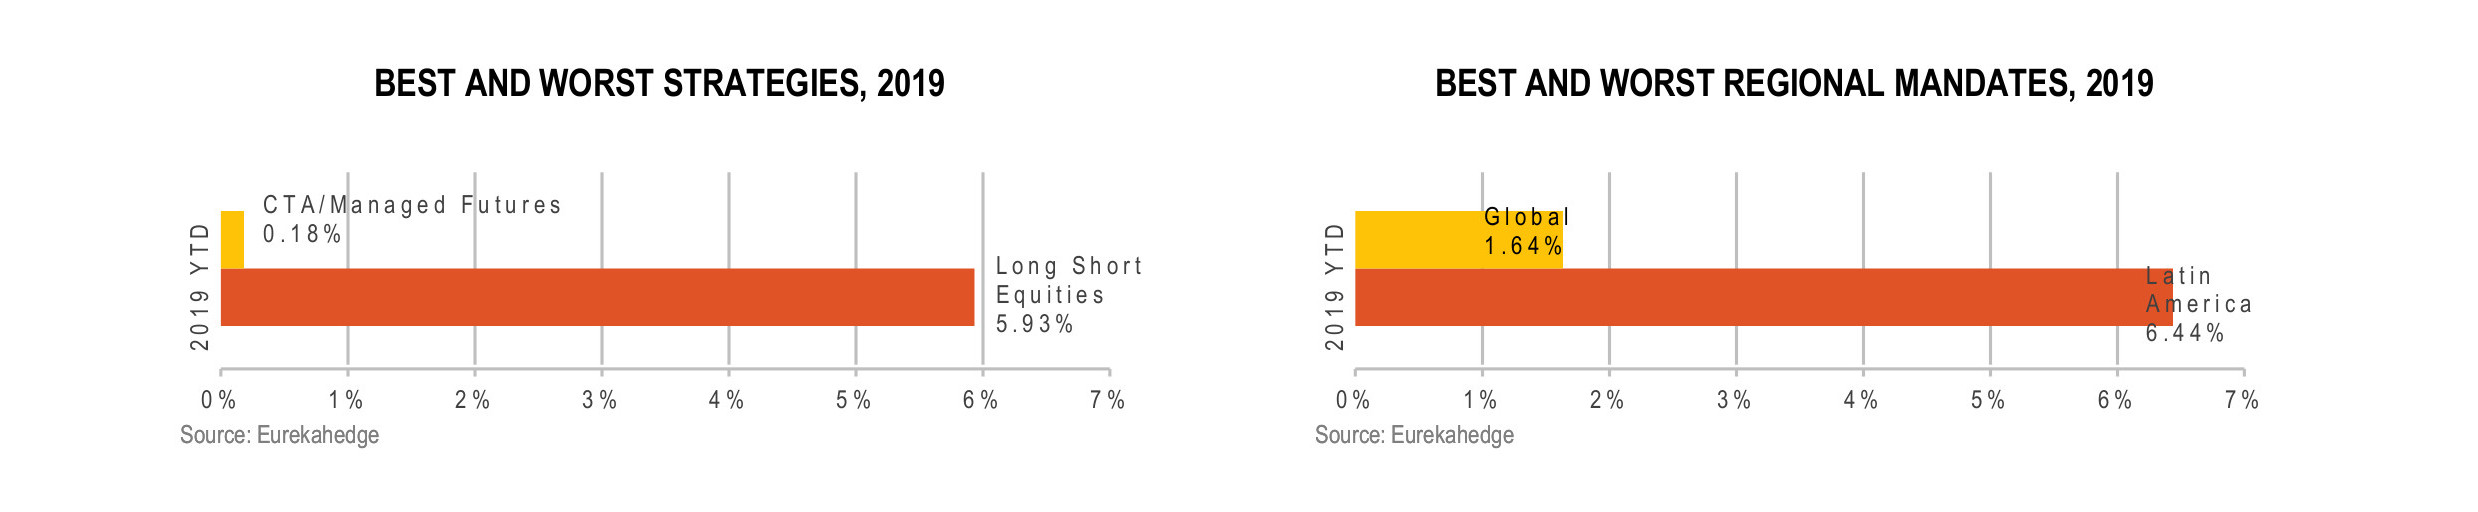 North American Hedge Funds Infographic March 2019 - best and worst strategy and regional mandate